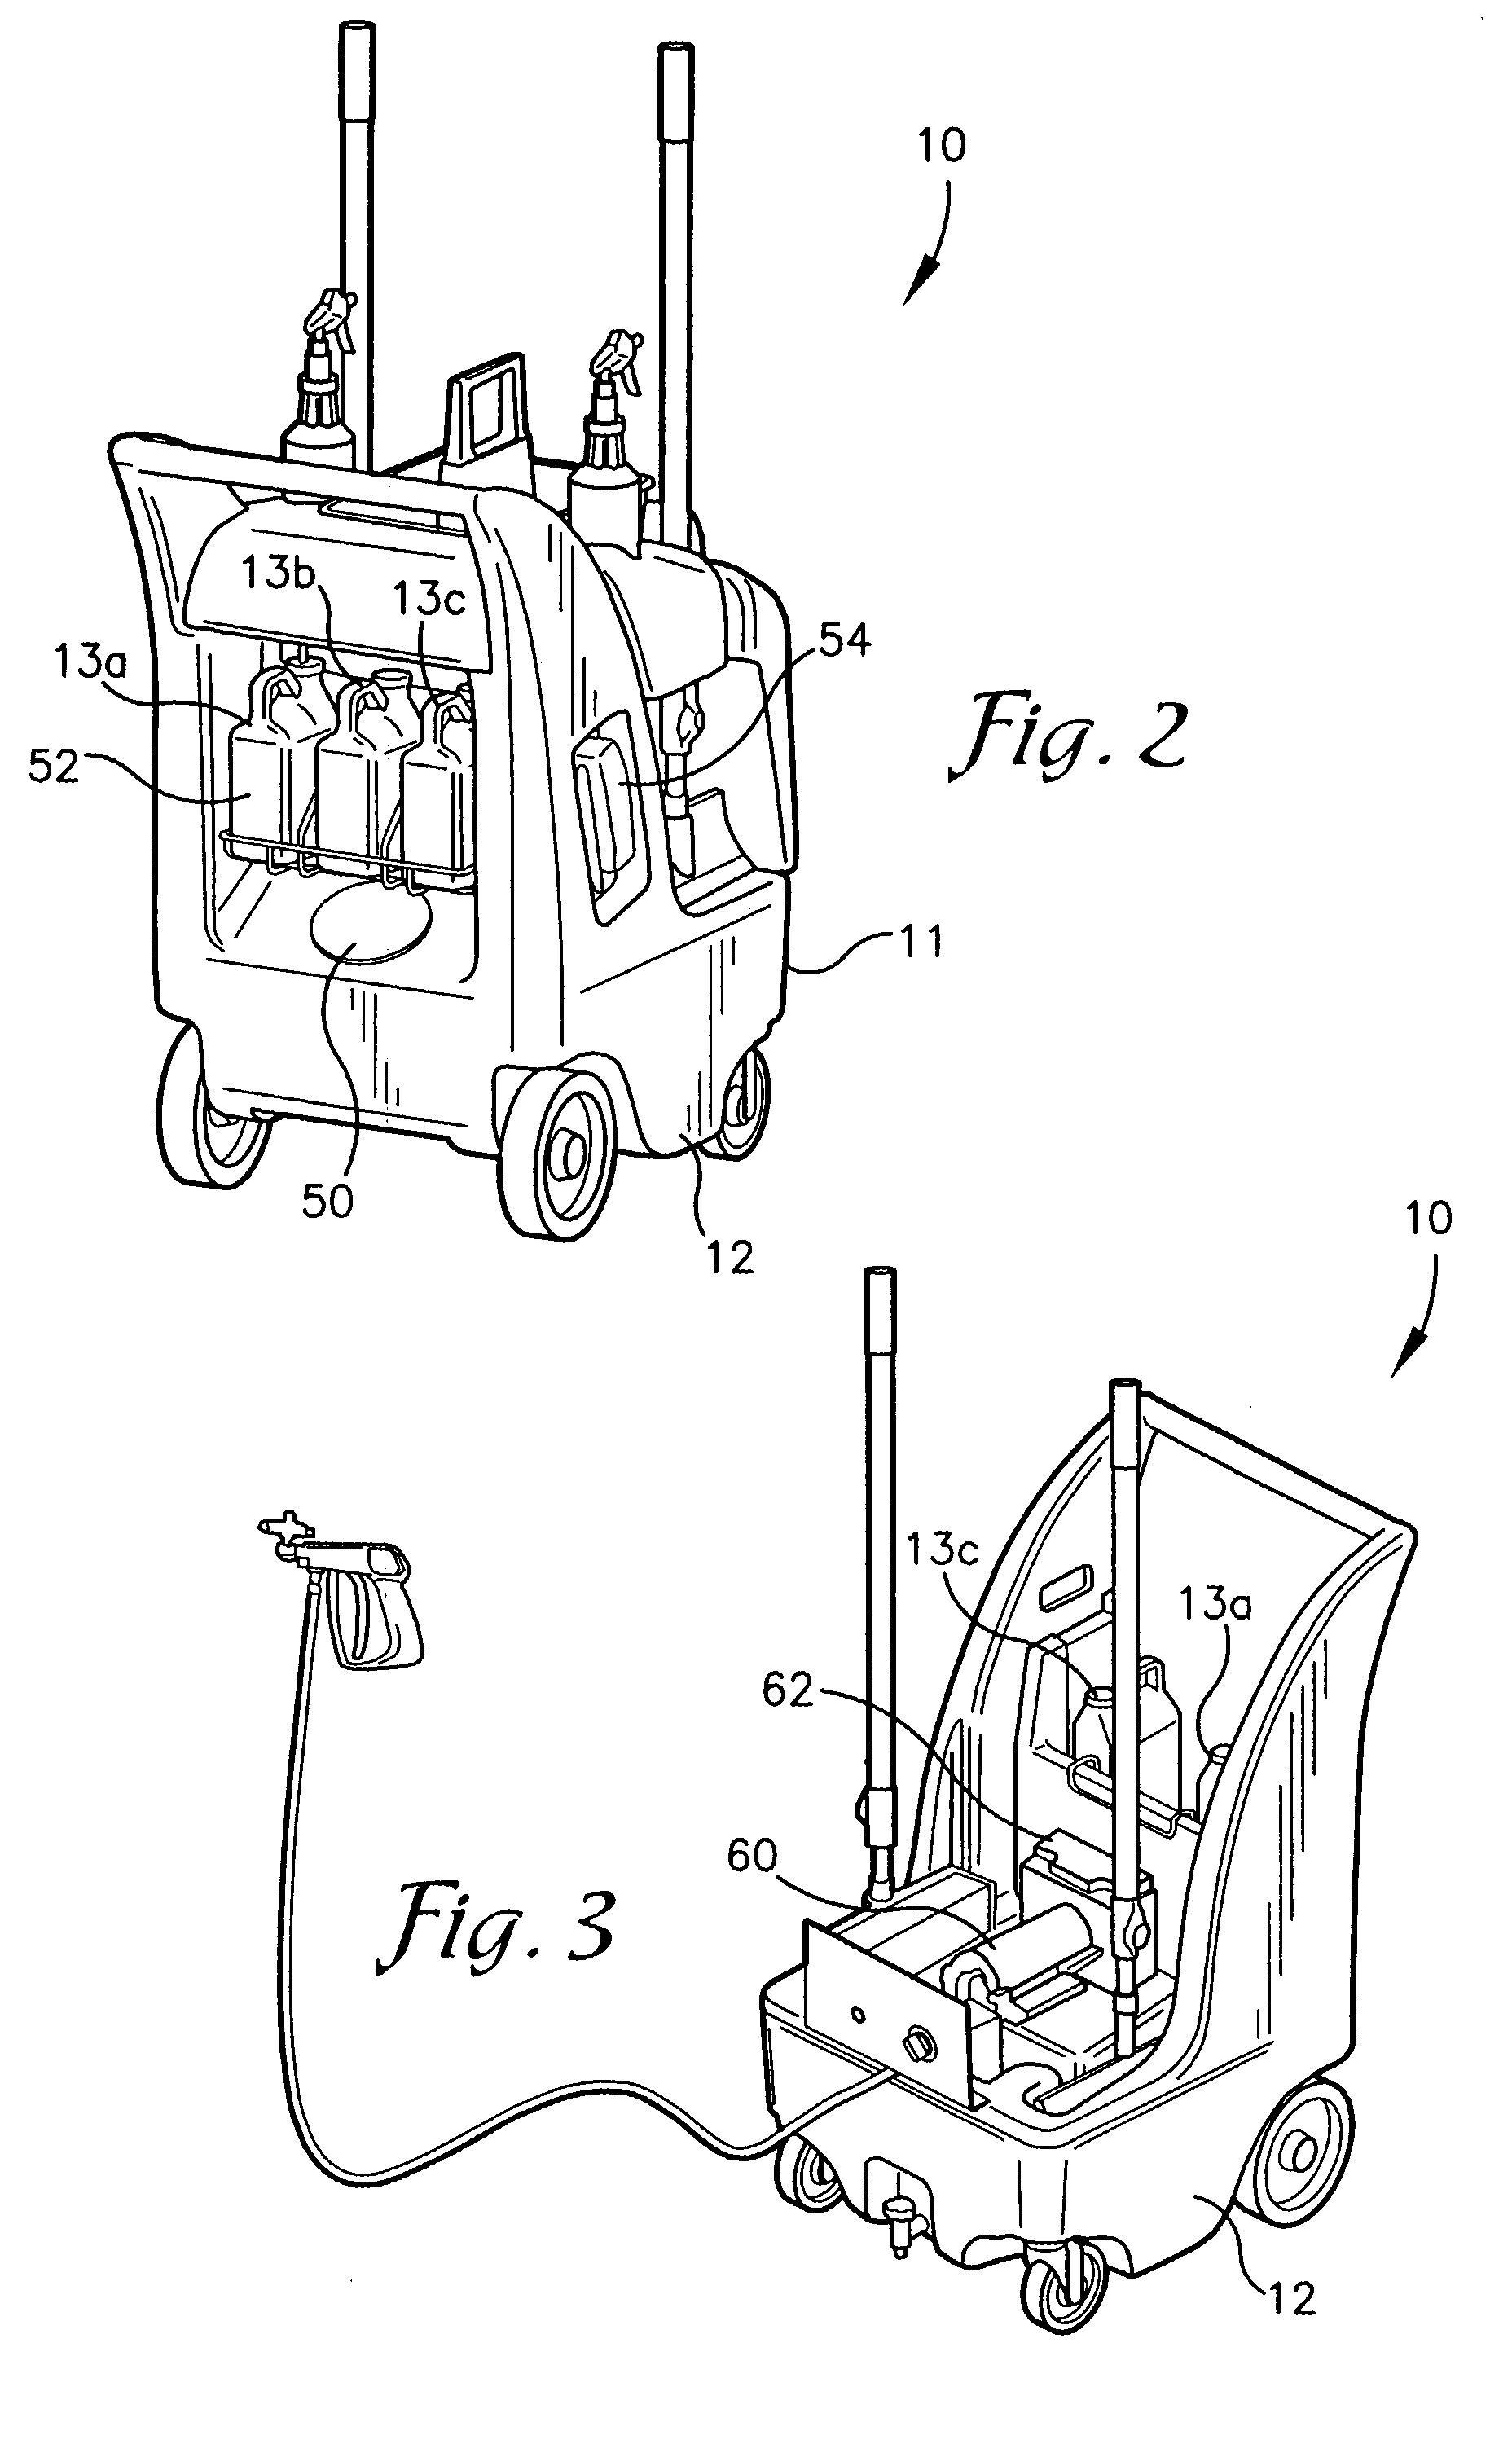 Janitorial handcart with chemical application apparatus